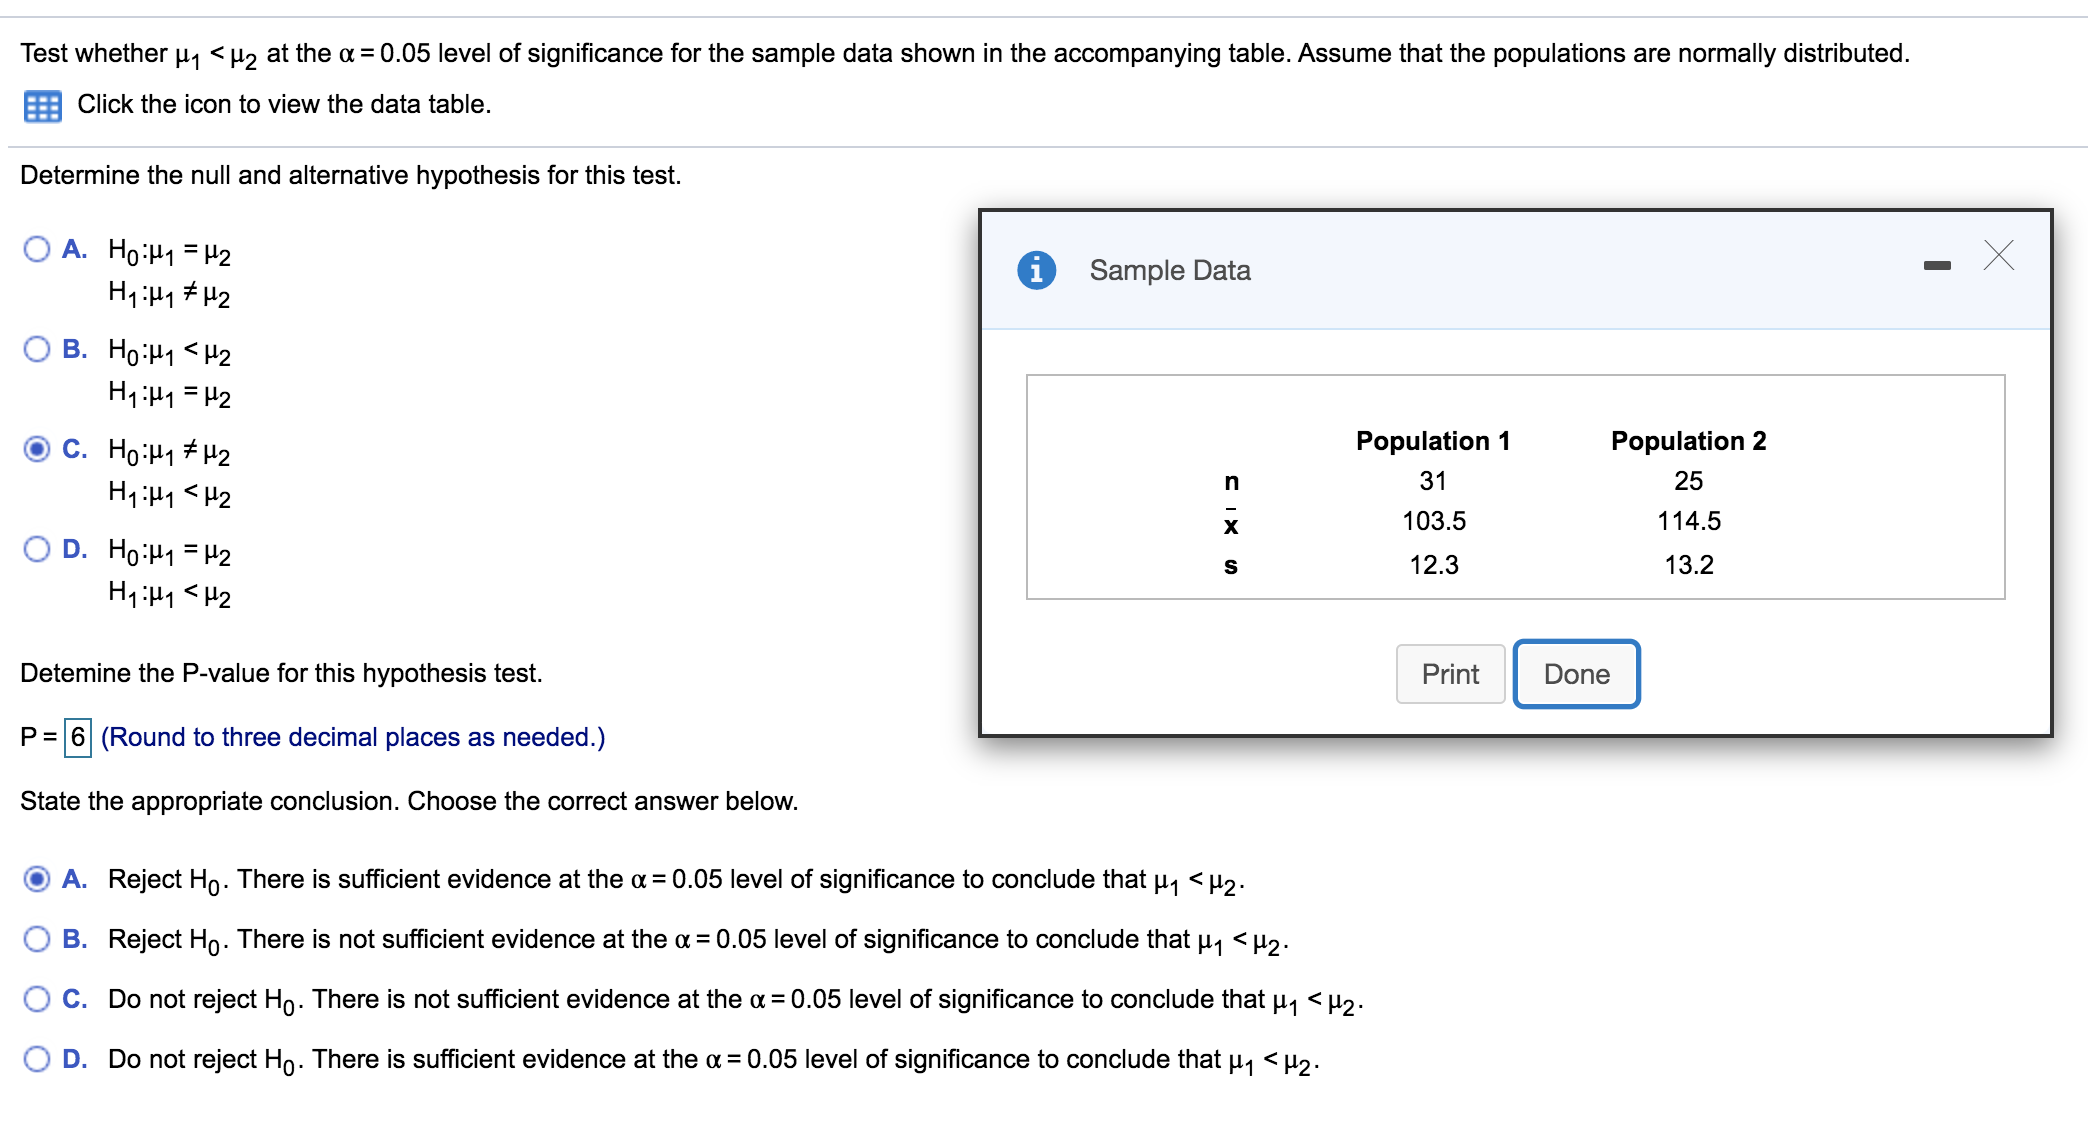 Test whether u, <µ2 at the a =0.05 level of significance for the sample data shown in the accompanying table. Assume that the populations are normally distributed.
Click the icon to view the data table.
Determine the null and alternative hypothesis for this test.
O A. Ho:H1 = H2
Sample Data
O B. Ho:H1 <H2
H1:H1 = H2
Population 1
Population 2
C. Ho:H1 # H2
H1:H1 <H2
31
25
103.5
114.5
O D. Ho:H1 = H2
12.3
13.2
Detemine the P-value for this hypothesis test.
Print
Done
P = 6 (Round to three decimal places as needed.)
State the appropriate conclusion. Choose the correct answer below.
O A. Reject Ho. There is sufficient evidence at the a = 0.05 level of significance to conclude that p, <µ2.
O B. Reject Ho. There is not sufficient evidence at the a = 0.05 level of significance to conclude that u1 <H2.
O C. Do not reject Ho. There is not sufficient evidence at the a = 0.05 level of significance to conclude that u, < µ2.
O D. Do not reject Ho. There is sufficient evidence at the a = 0.05 level of significance to conclude that u, <H2.
